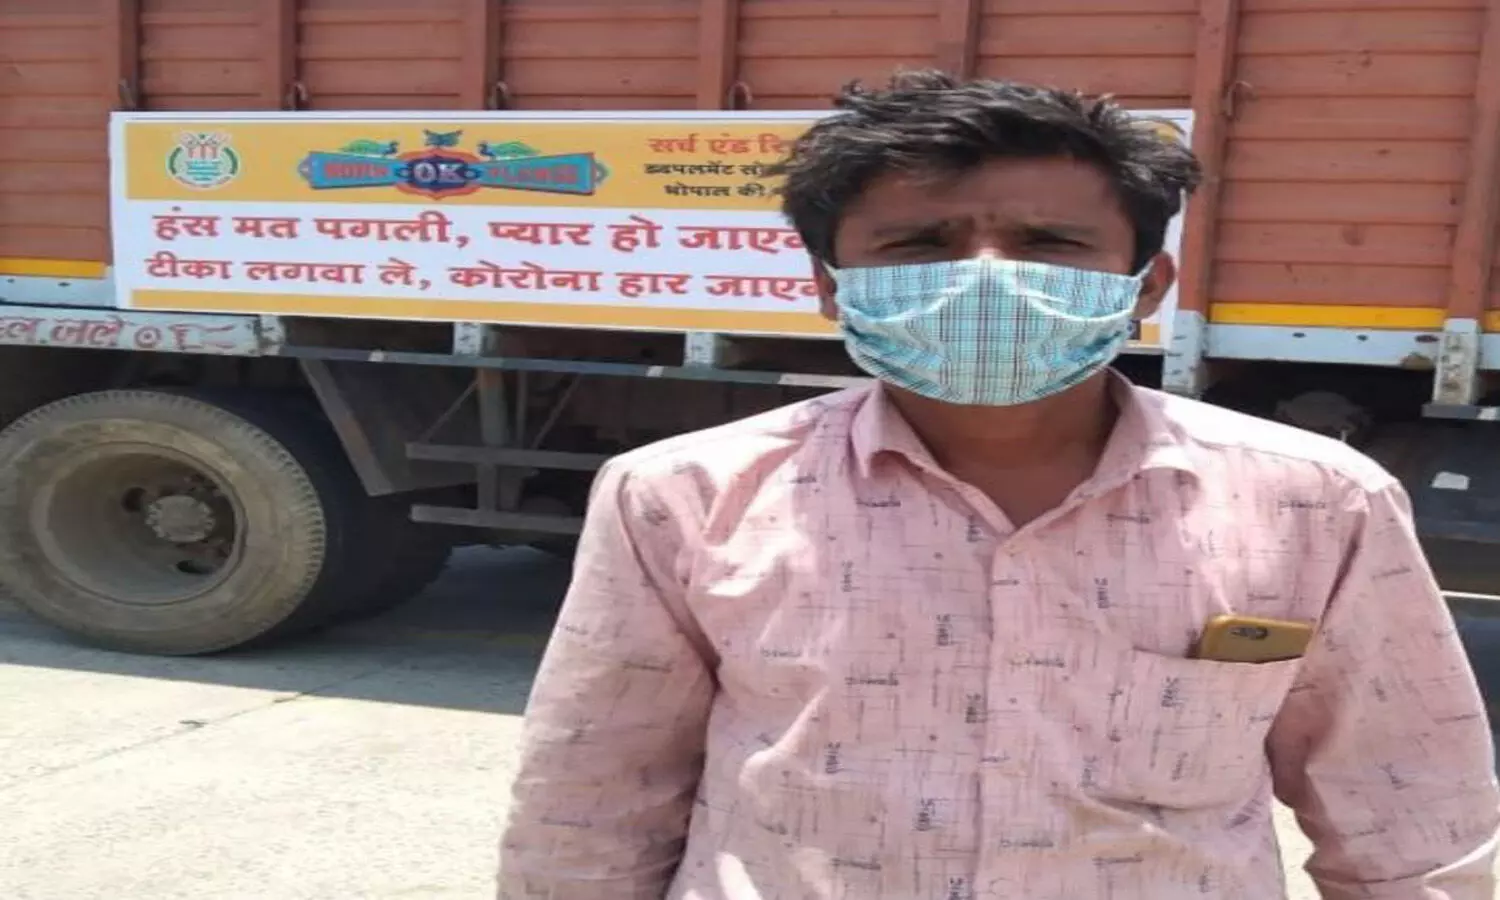 Hans mat pagli...: Rhyming slogans on trucks to motivate people to get vaccinated